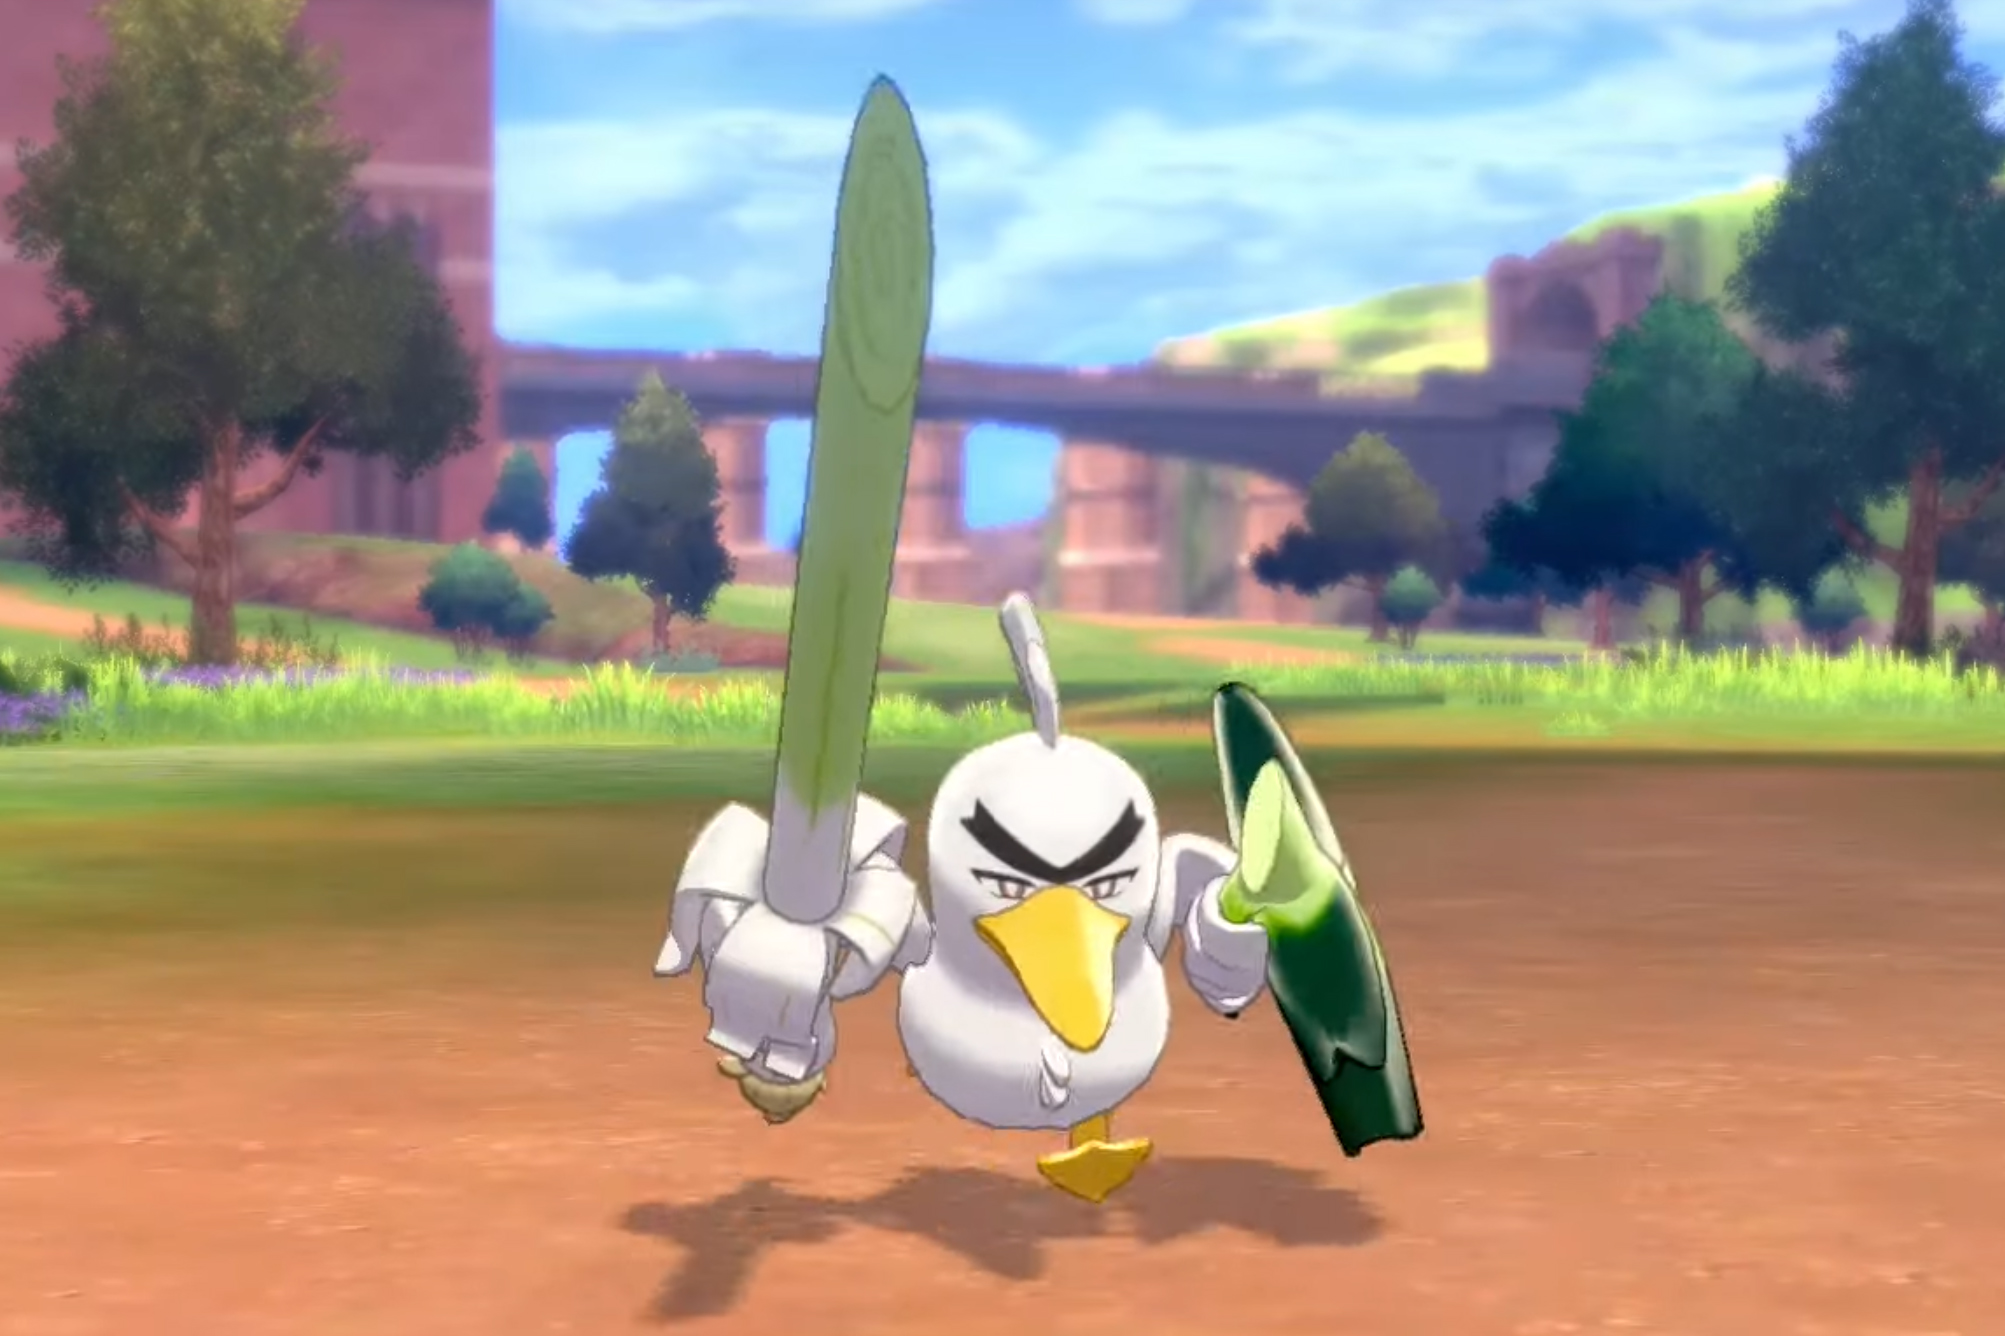 Sirfetch'd, Farfetch'd Evolution, Confirmed for Pokemon Sword and Shield